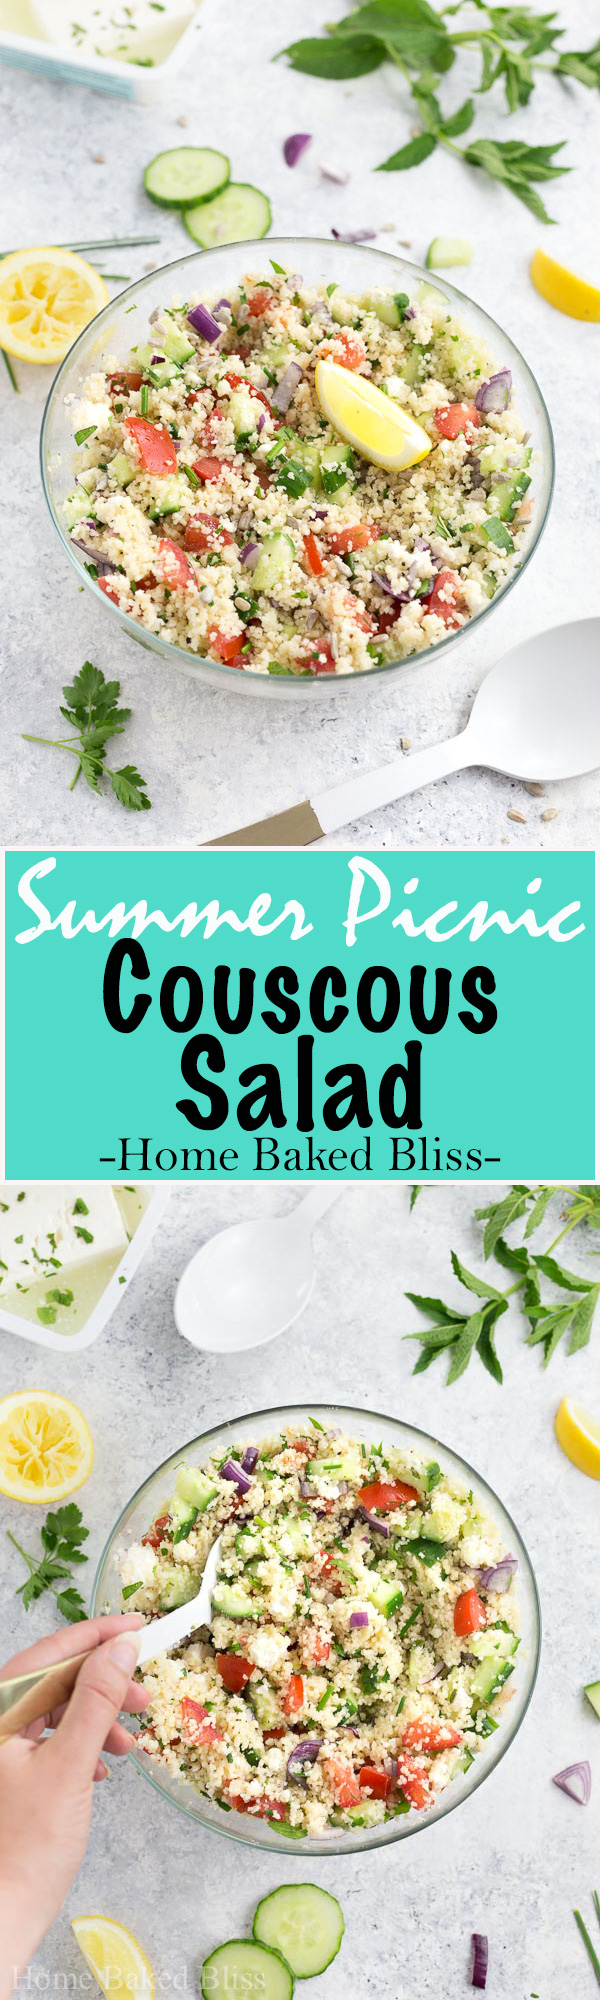 A colourful and flavourful summer inspired couscous salad with tomatoes, cucumbers, onions, and feta cheese. Seasoned with fresh herbs. The perfect recipe for a picnic!